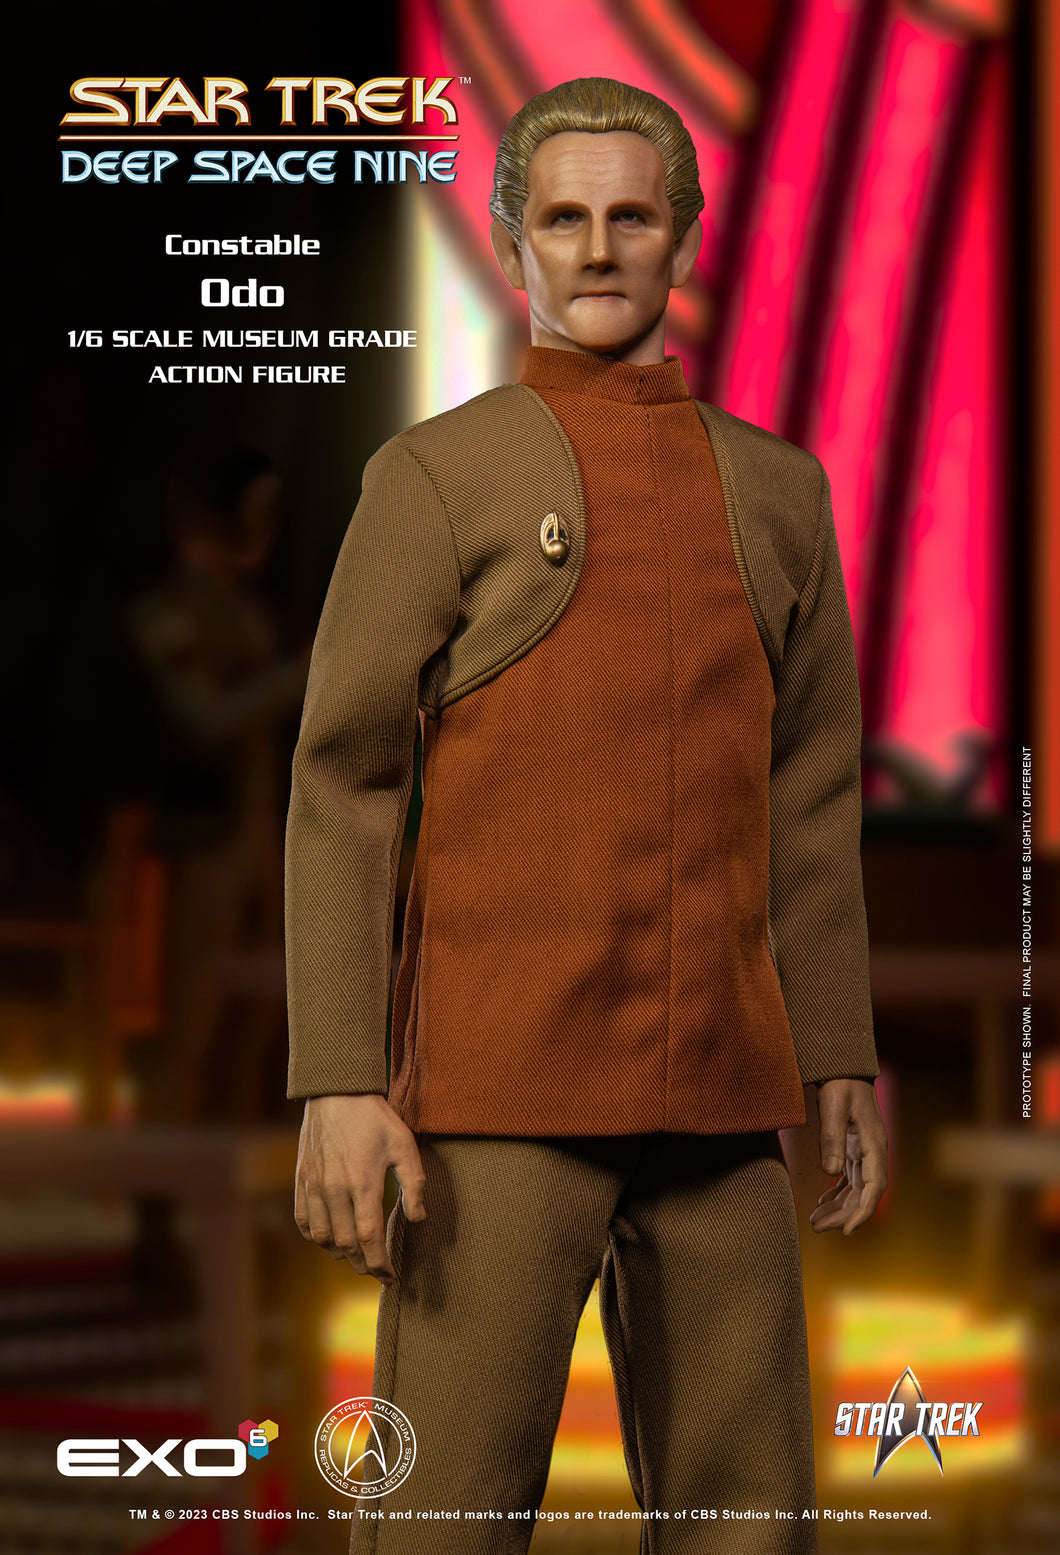 DS9 Constable Odo  NON REFUNDABLE PRE-ORDER DEPOSIT (Final Amount due $215+shipping) Pre-Order Ended